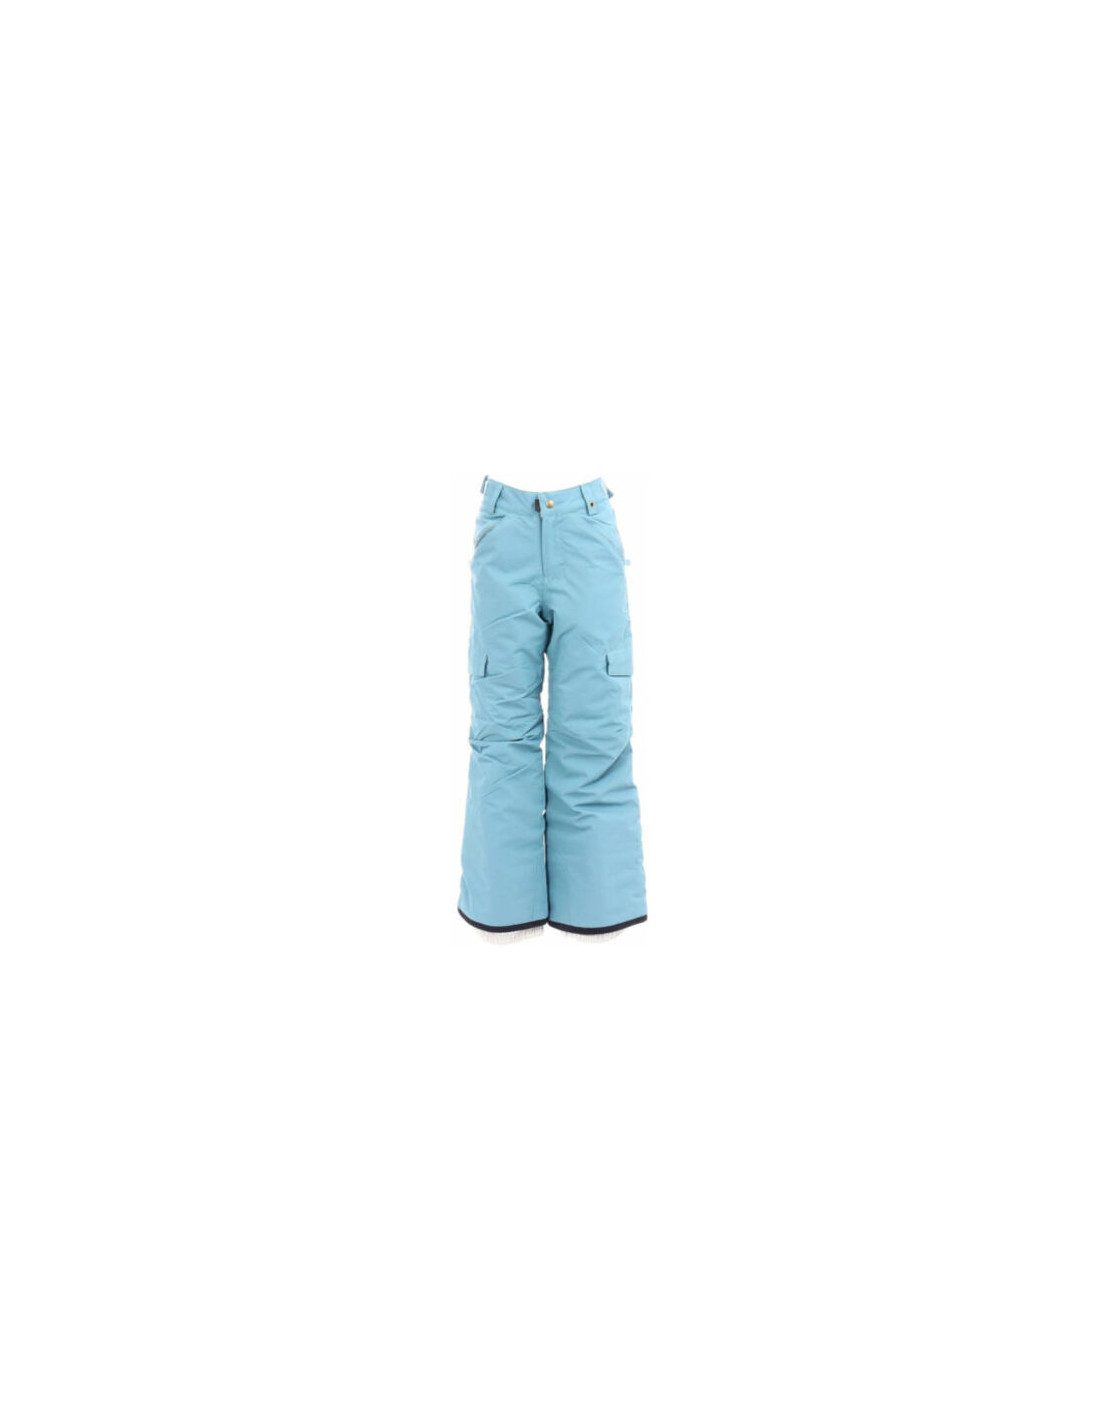 YOUTH GIRLS LOLA INSULATED PANT